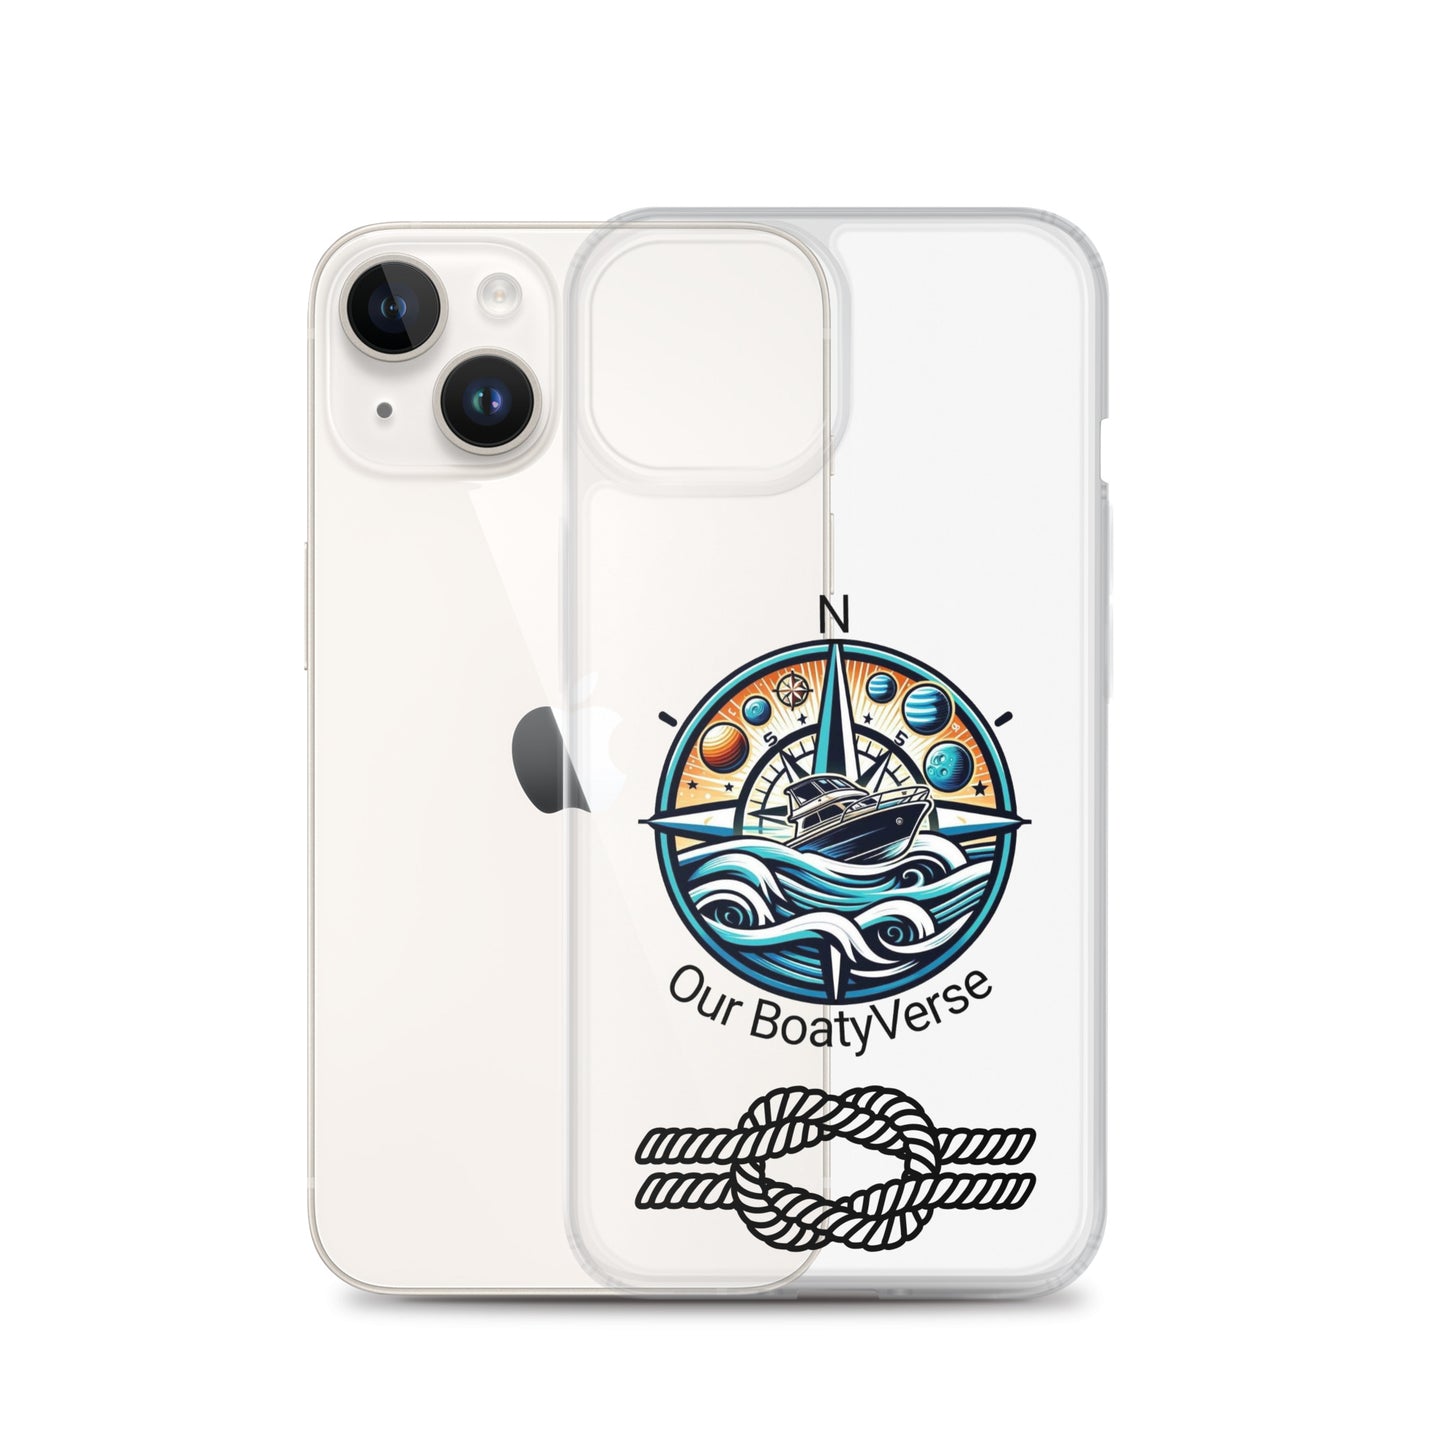 iPhone Stylish Clear Case for all latest models iPhone® by Our BoatyVerse